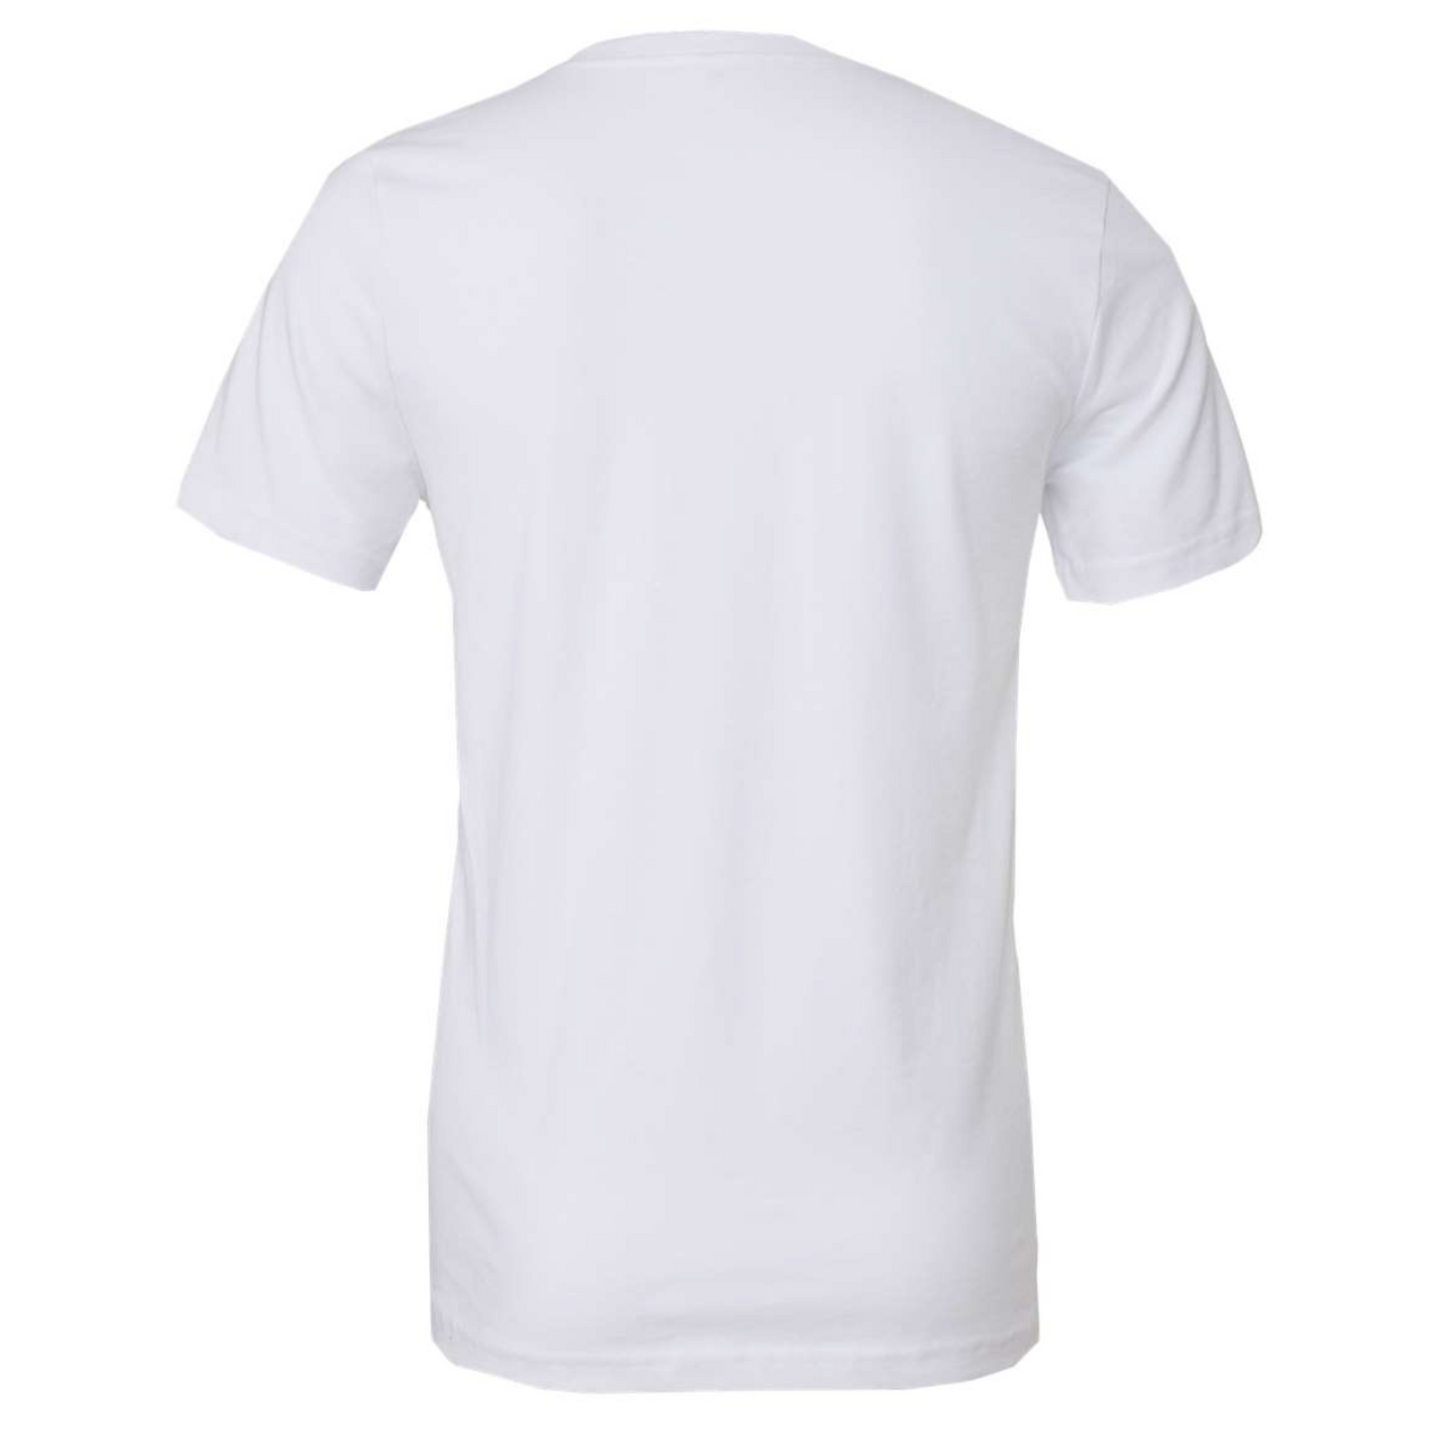 I Like Wine & Maybe 3 People - White T-Shirt in black writing. This is the back view of the t-shirt on a white background.